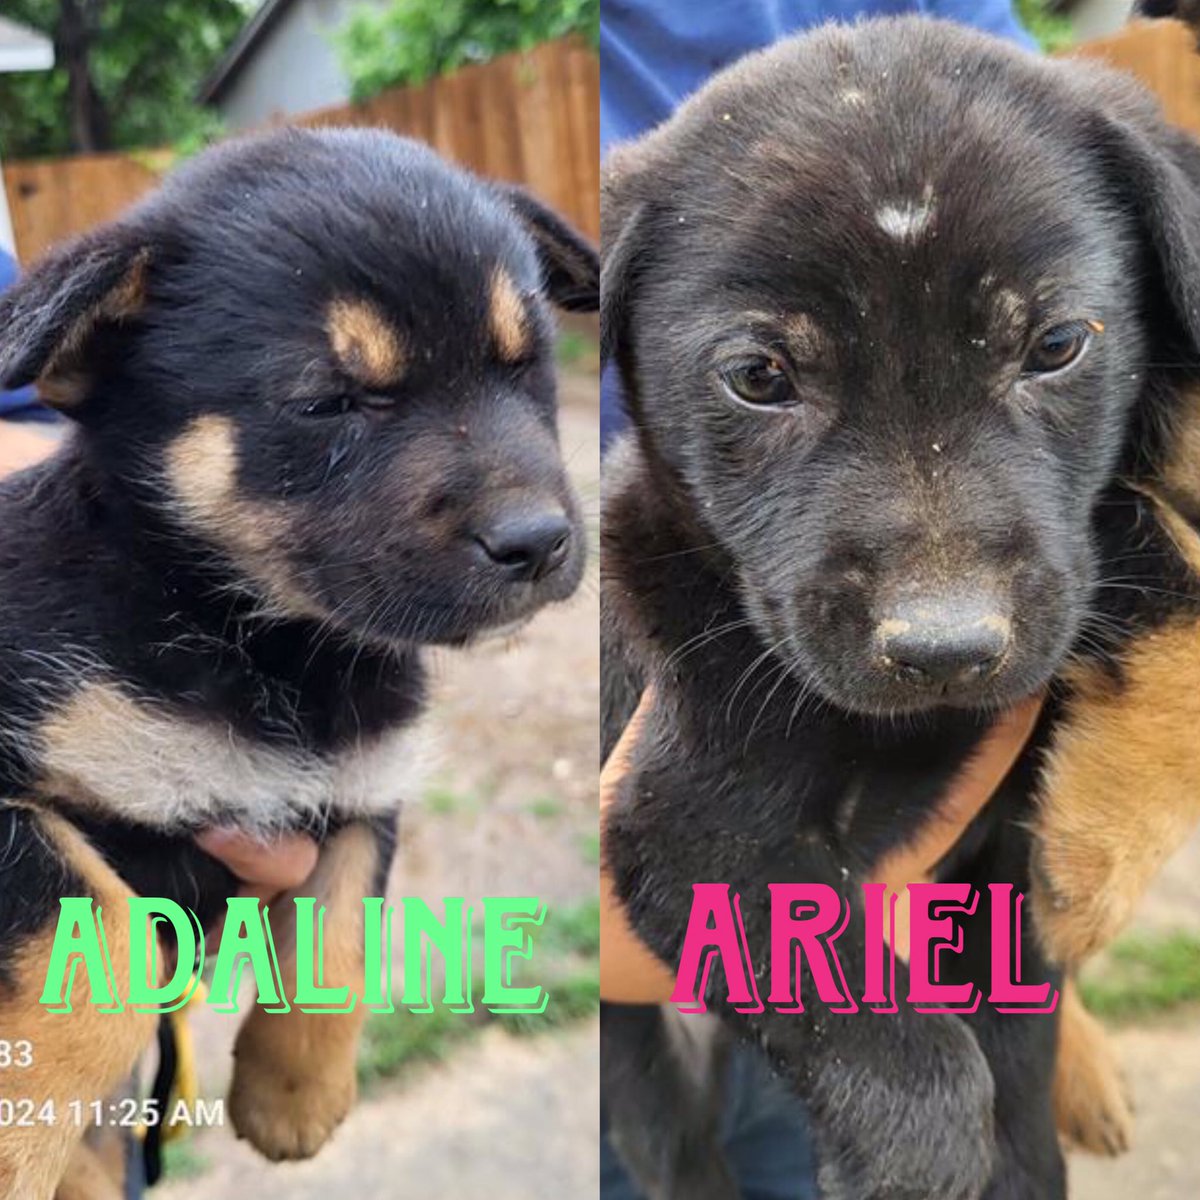 🆘 THESE PUPPIES FROM 2 TO 3 MTHS OLD ARE TO BE KILLED ☠️ TODAY 5.9 BY SAN ANTONIO #TEXAS‼️

GUNNAR #A712332 
Labrador Retriever

YVETTE #A712192 
Chihuahua

ADALINE #A712201
ARIEL #A712202
German Shepherds

#Foster/#AdoptDontShop ☎️2102074738
#PledgeForRescue